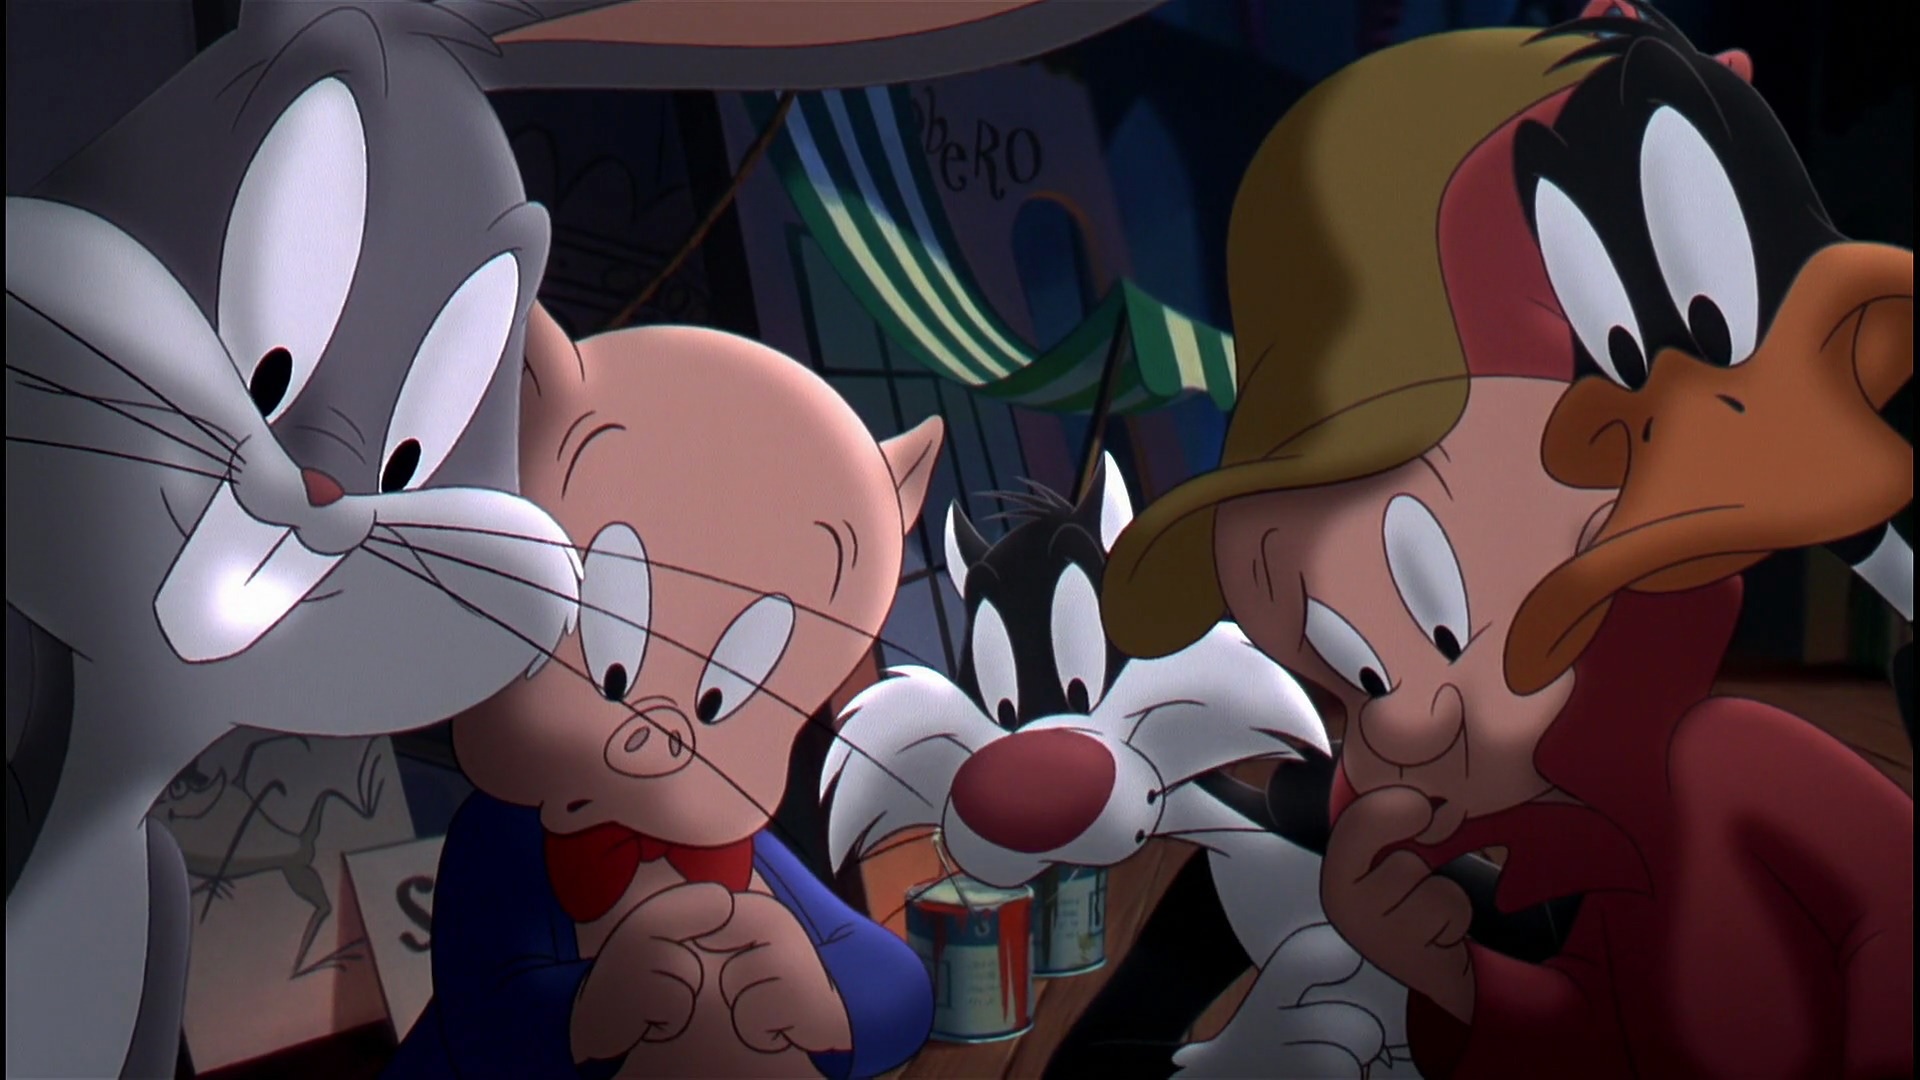 Looney Tunes in Space Jam - High Definition, High Resolution HD Wallpapers  : High Definition, High Resolution HD Wallpapers